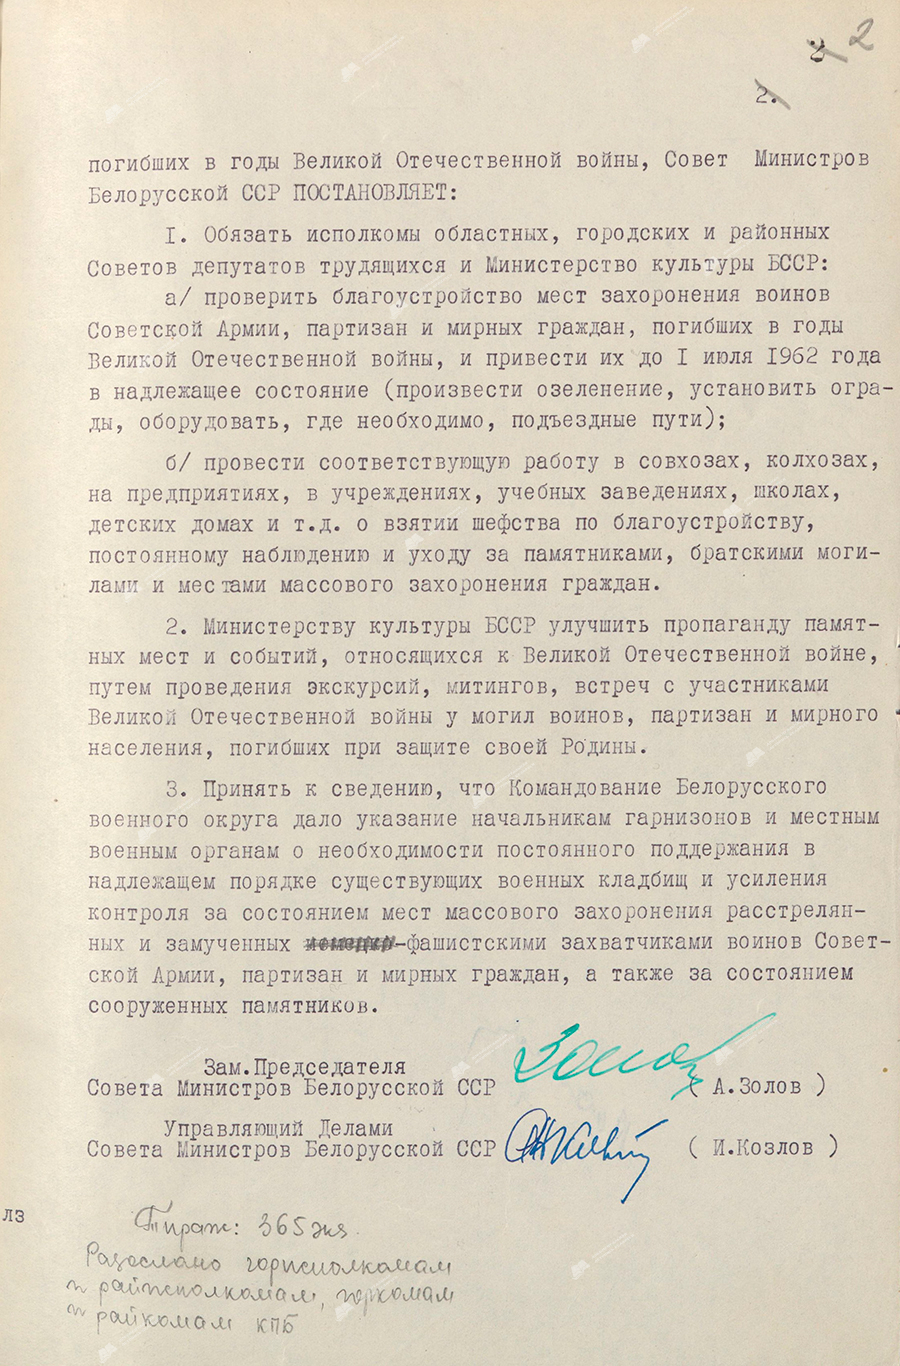 Resolution No. 674 of the Council of Ministers of the BSSR «On the proper maintenance of monuments and burial places of soldiers of the Soviet Army, partisans and civilians who died during the Great Patriotic War (1941 – 1945)»-стр. 1